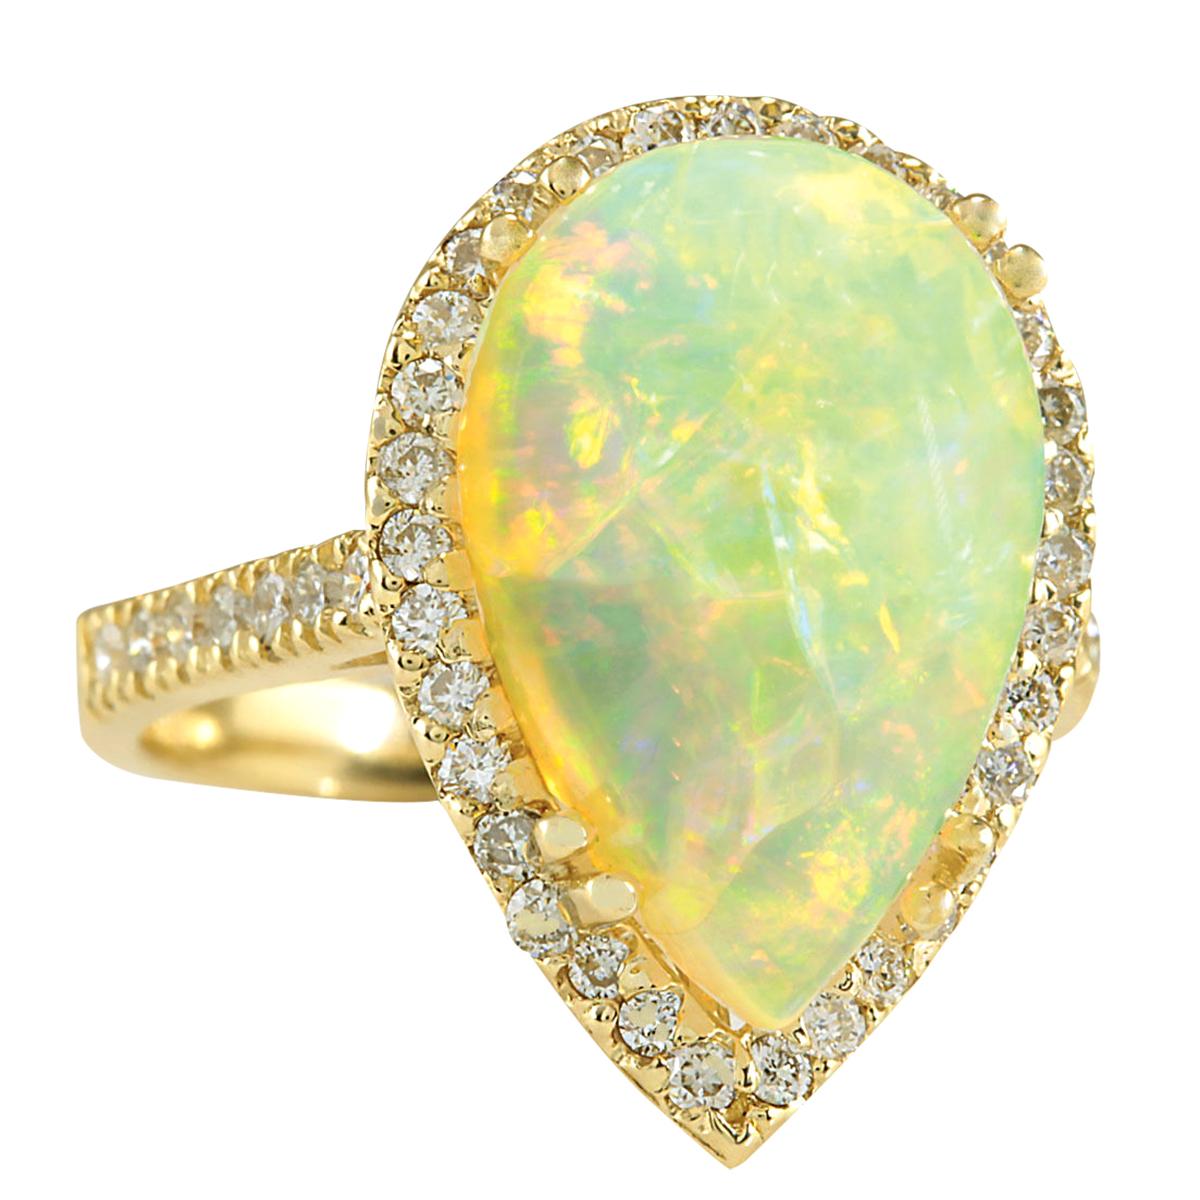 Stamped: 14K Yellow Gold
Total Ring Weight: 6.0 Grams
Total Natural Opal Weight is 5.60 Carat (Measures: 17.00x11.40 mm)
Color: Multicolor
Total Natural Diamond Weight is 0.65 Carat
Color: F-G, Clarity: VS2-SI1
Face Measures: 20.90x14.55 mm
Sku: